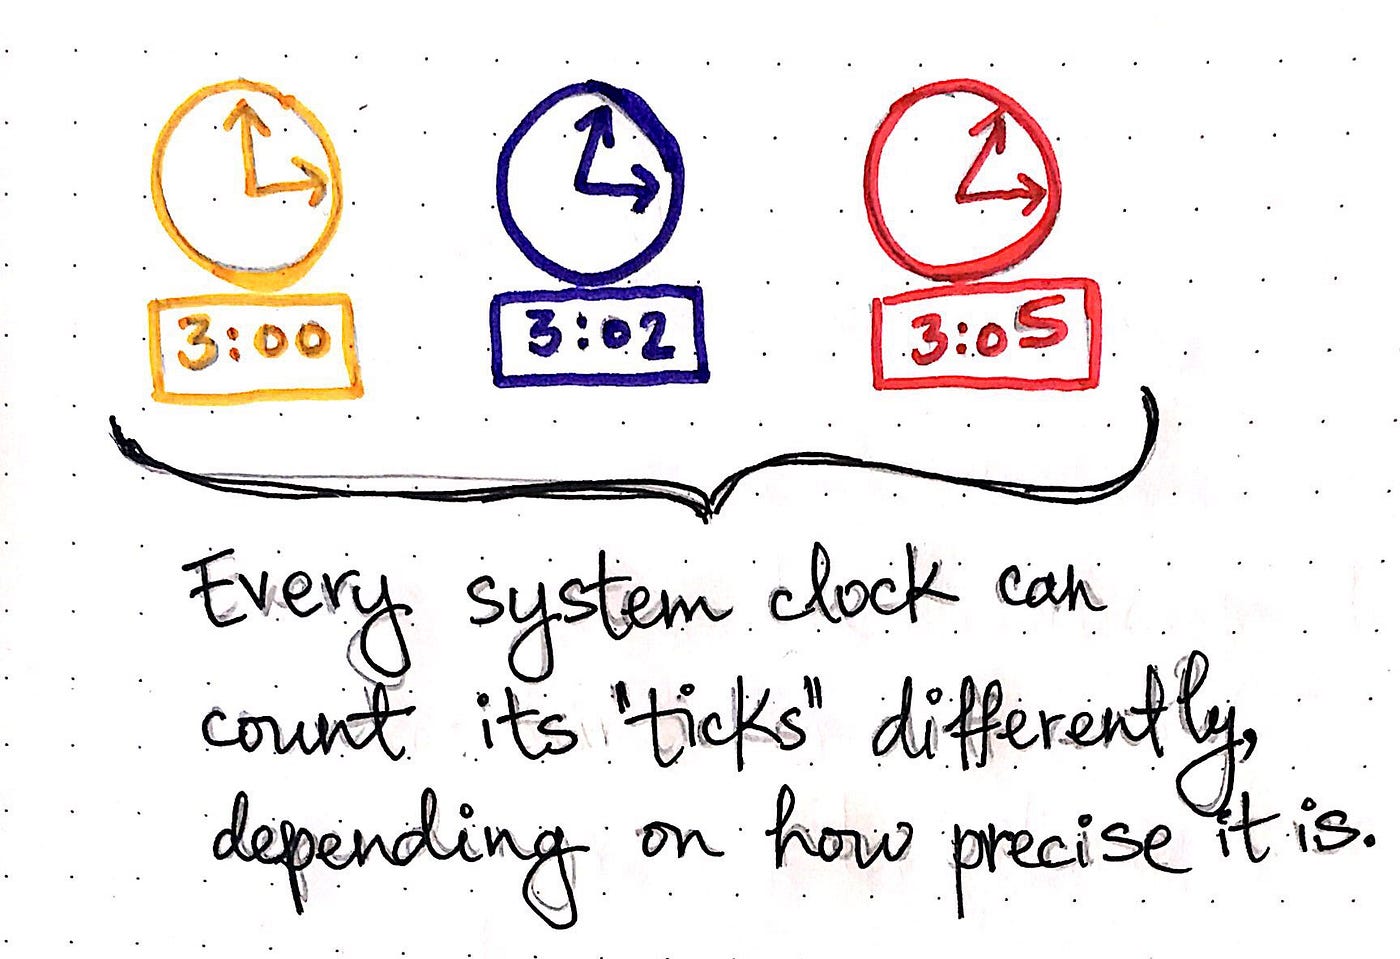 Ticking Clocks in a Distributed System | by Vaidehi Joshi | baseds | Medium